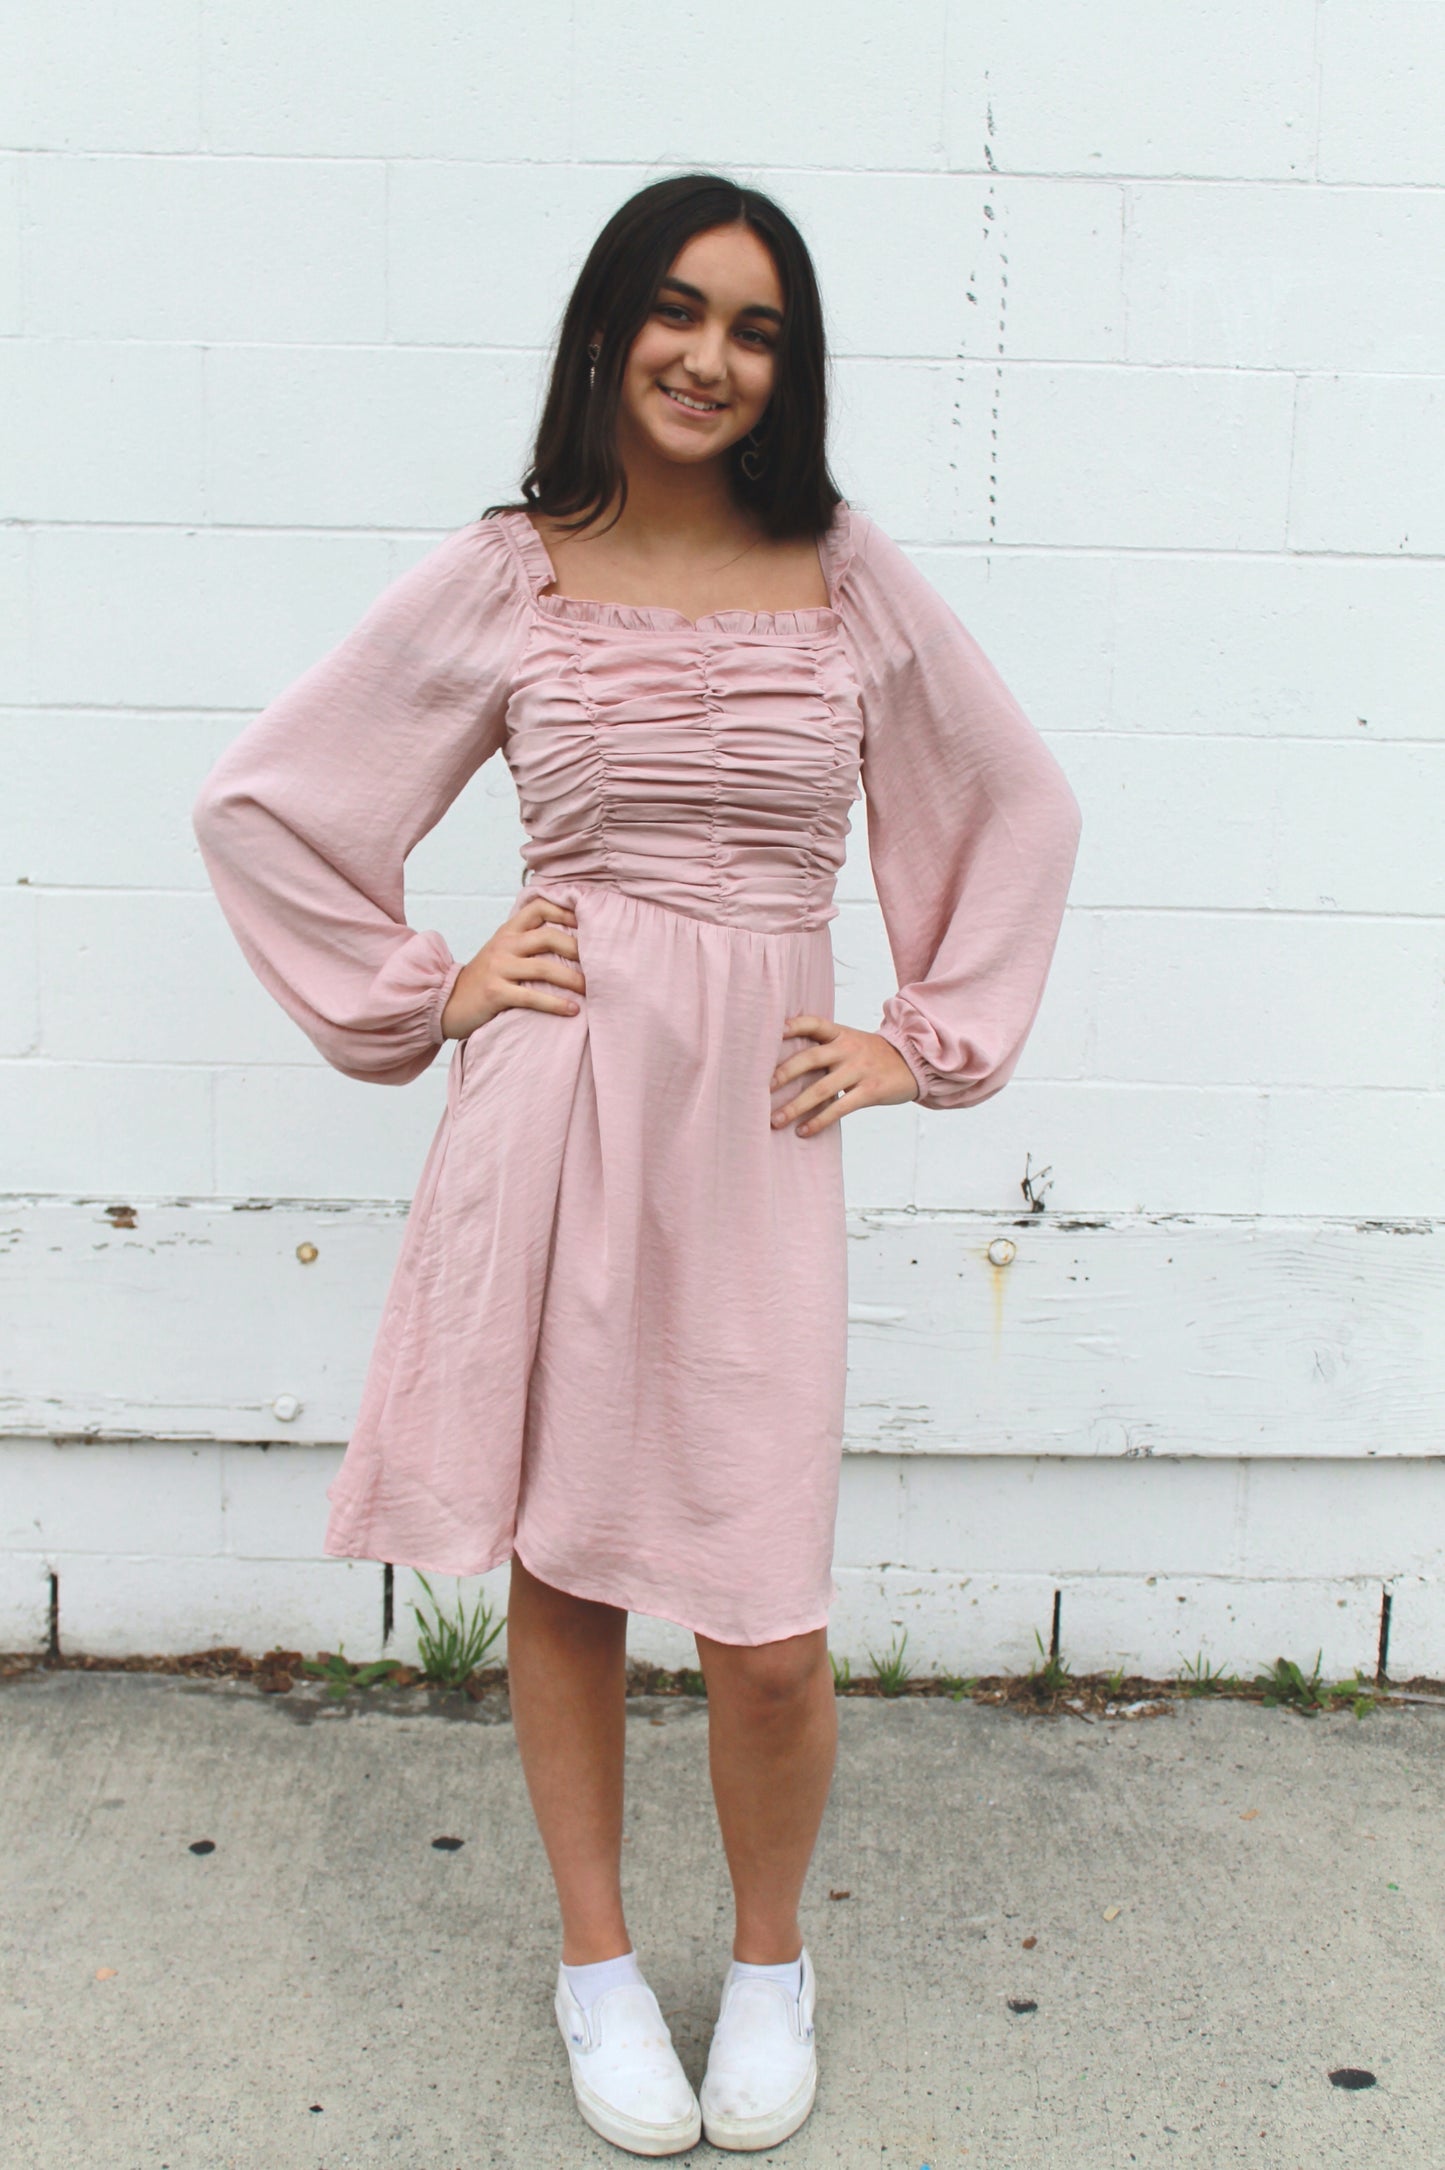 Blush pink ruffled top dress with long sleeves and pockets, knee length.